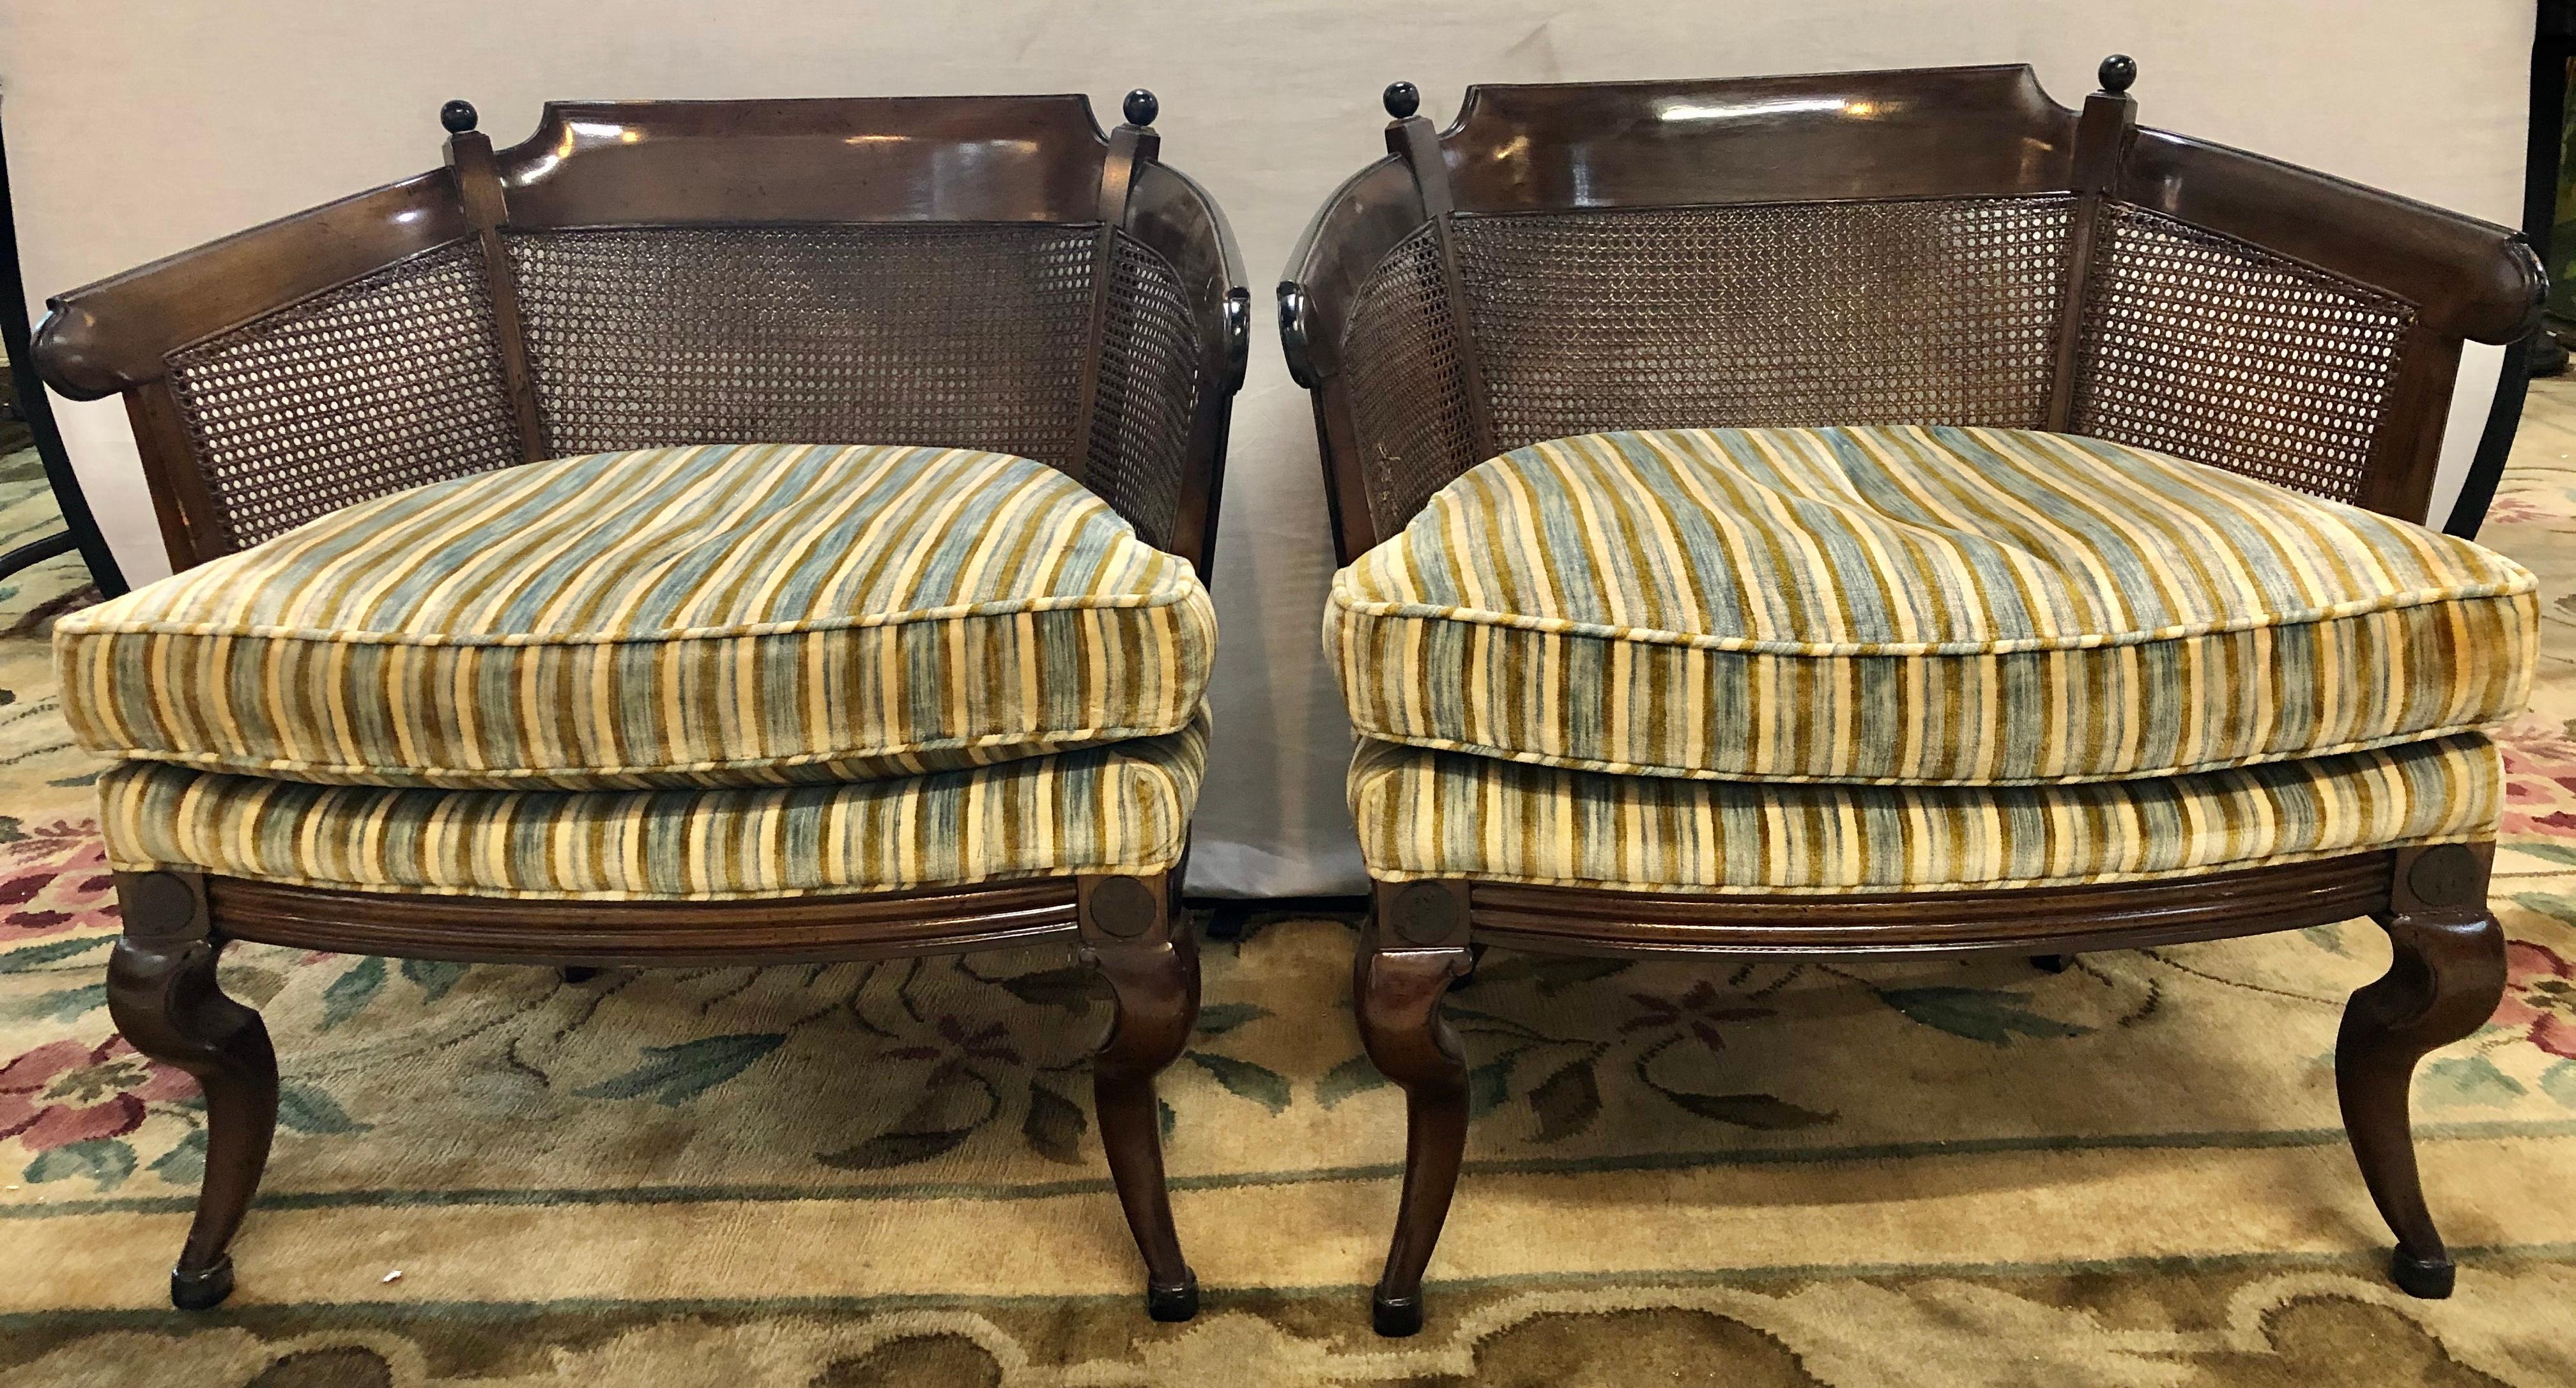 American Pair of Mid-Century Modern Tub Chairs in Striped Upholstery with Cushion